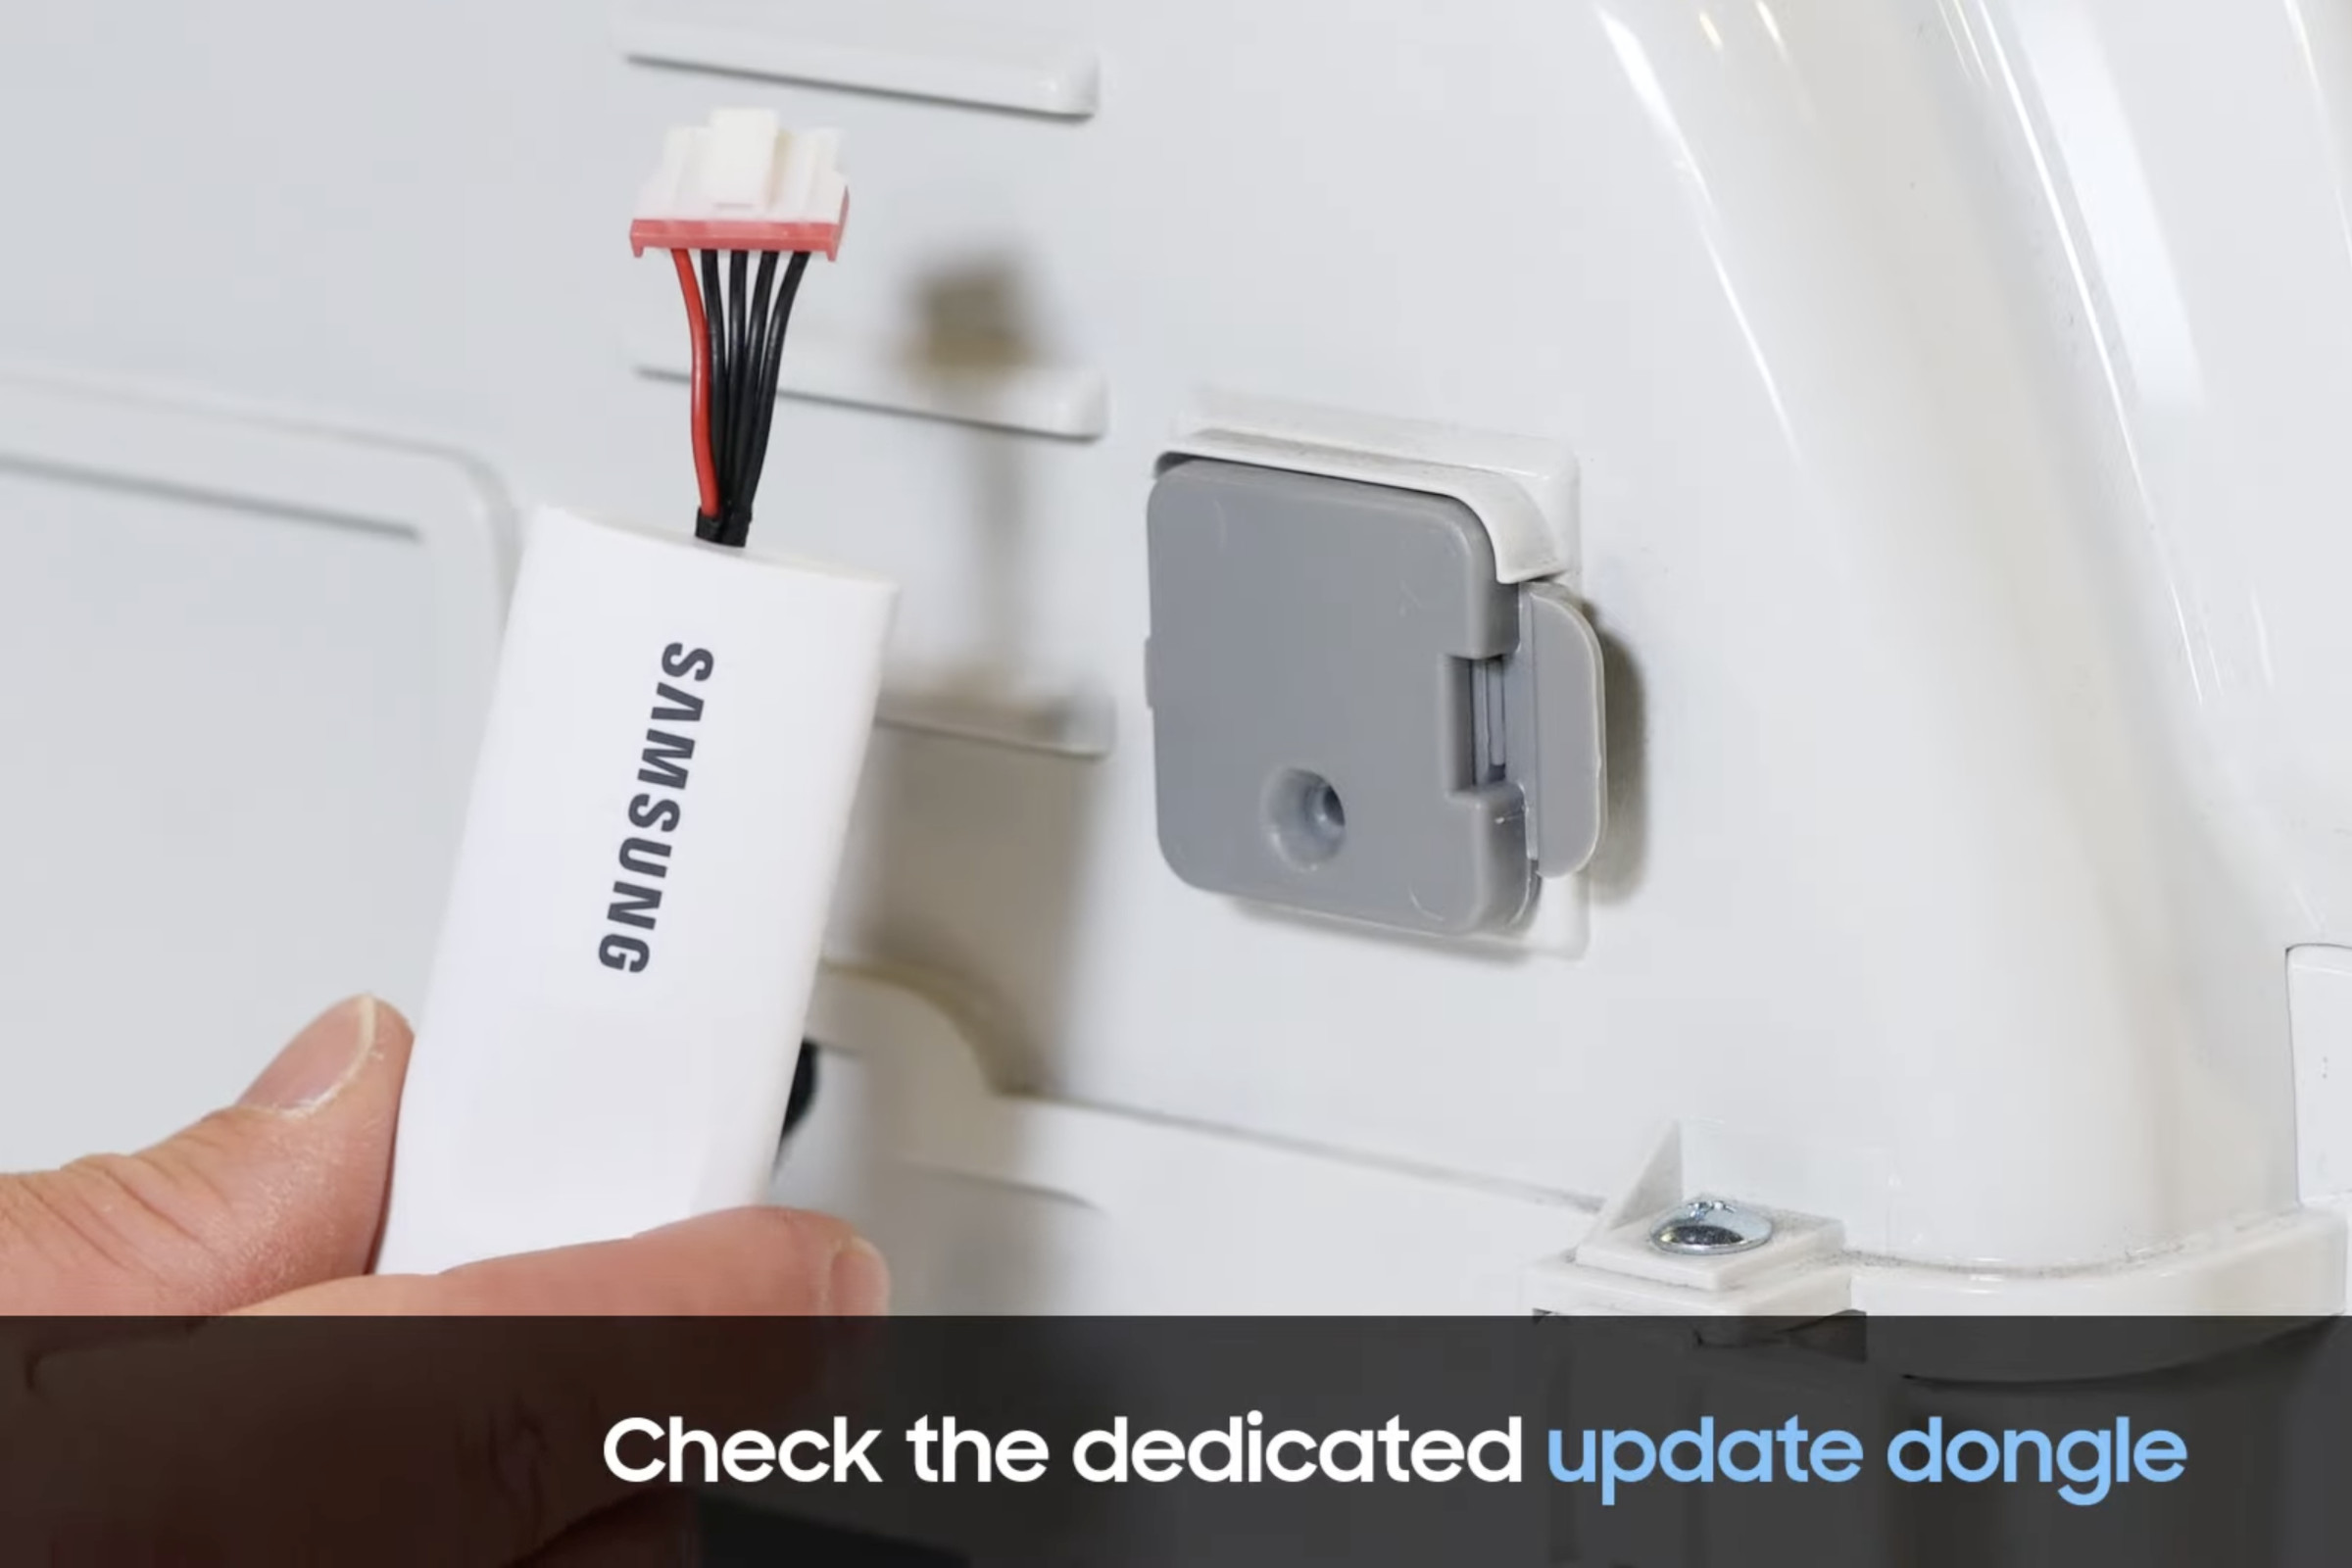 Image of a person holding the Samsung dedicated update dongle.